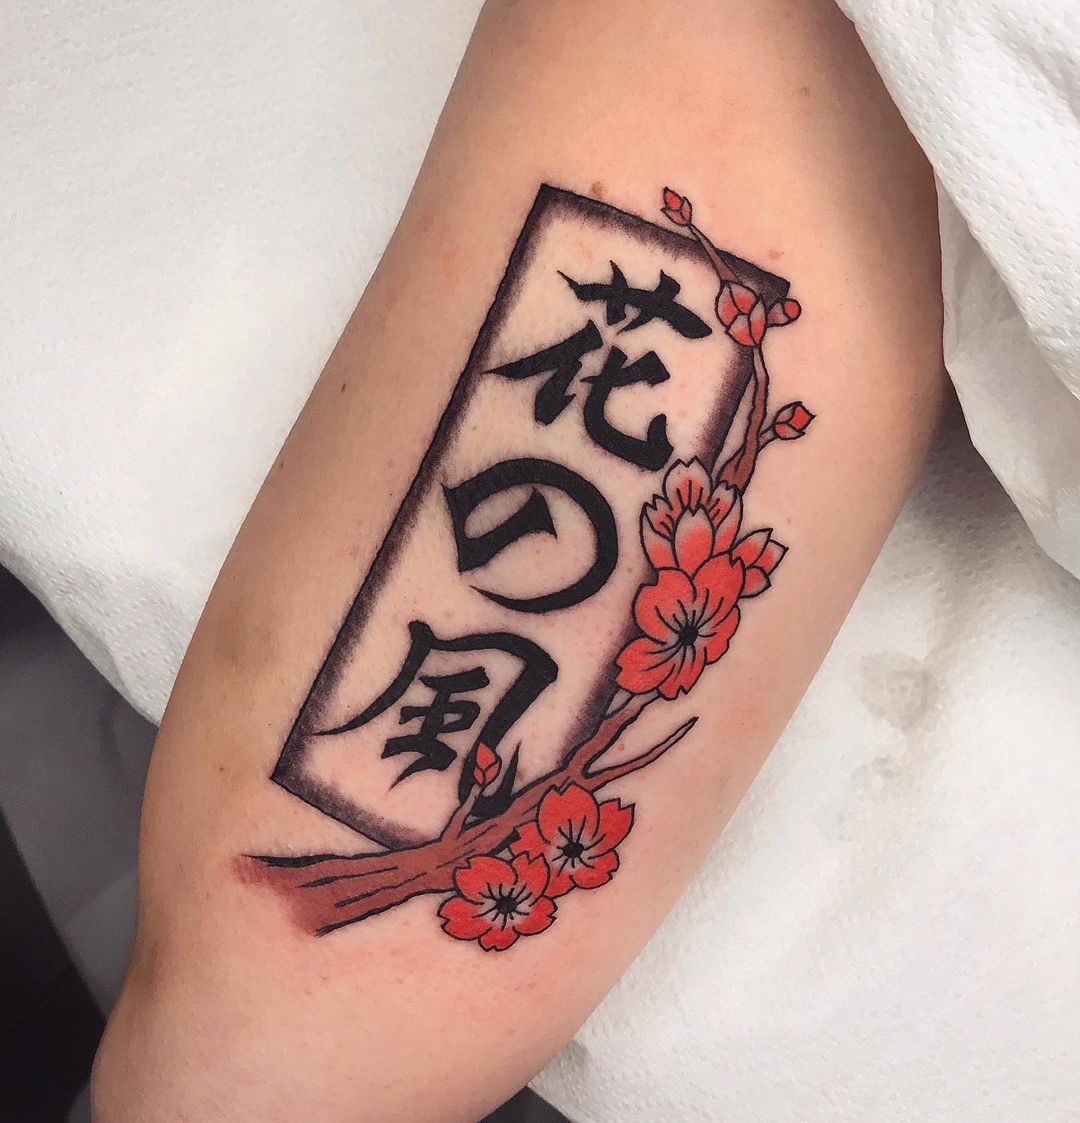 Asia lovers  Japanese tattoos and their meaning  Japan tattoos  tattoart  Facebook